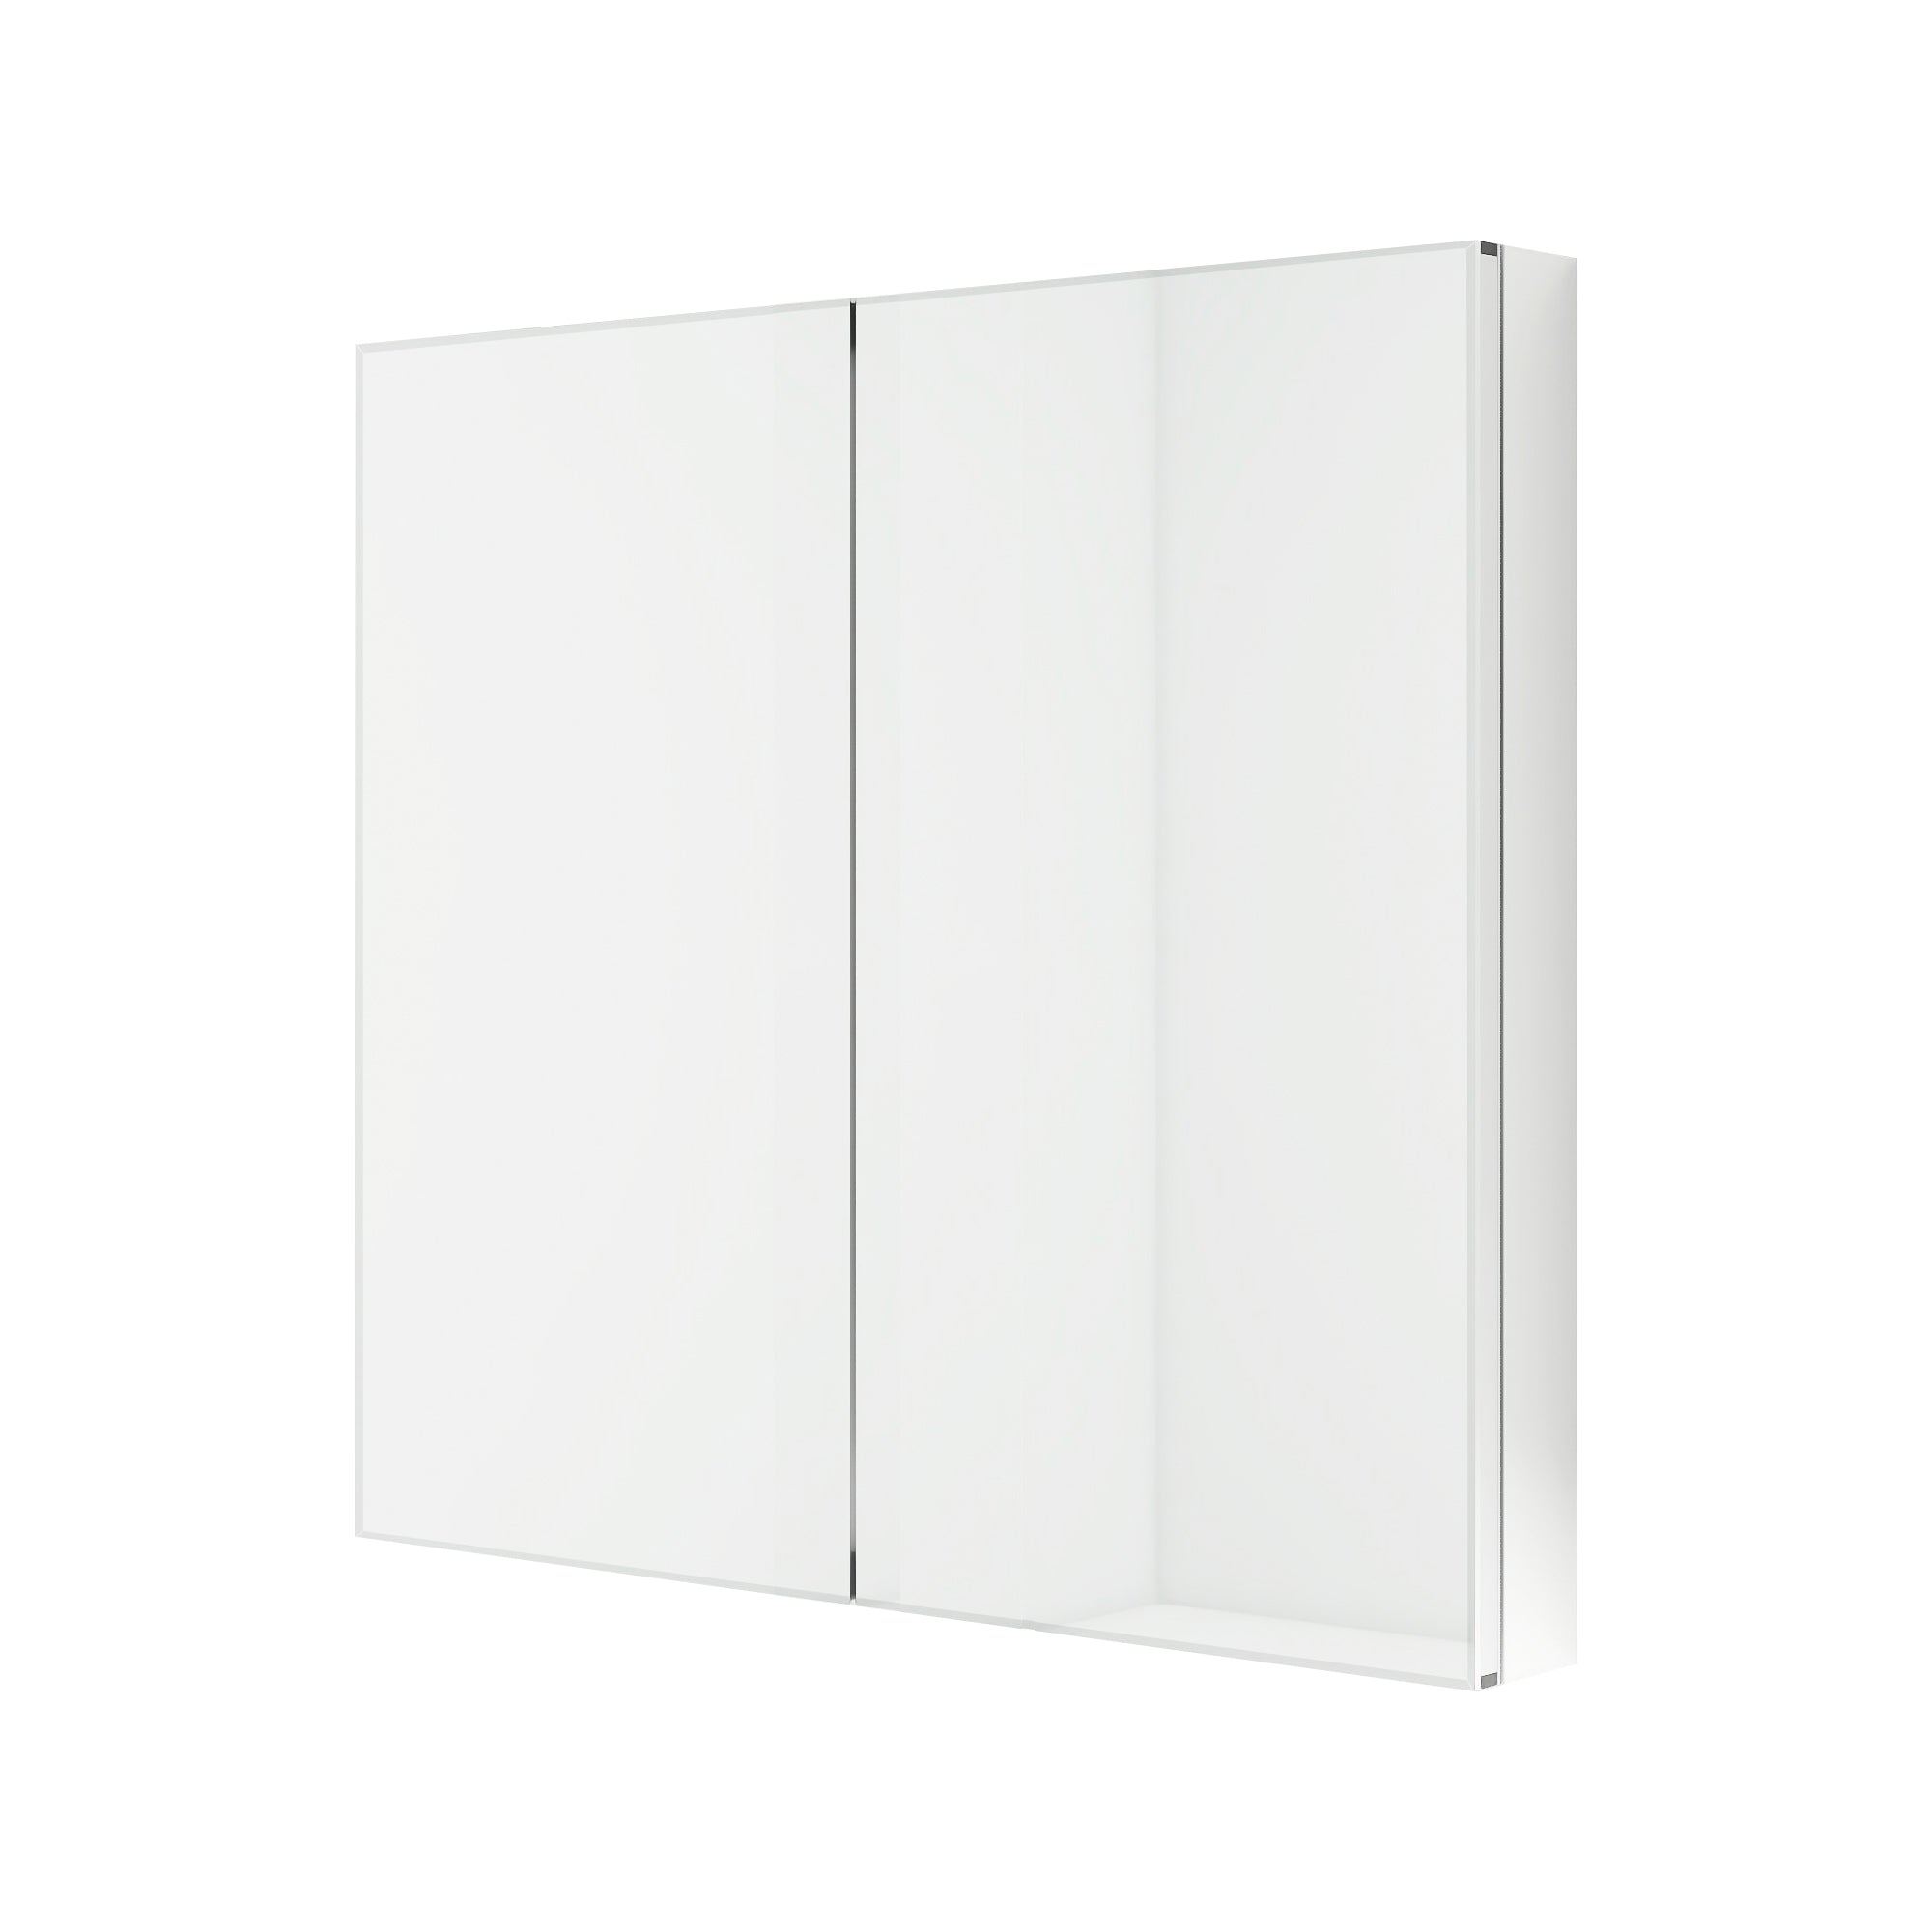 30 x 26 in. Rectangular Silver Aluminum Recessed/Surface Mount Medicine Cabinet with Mirror